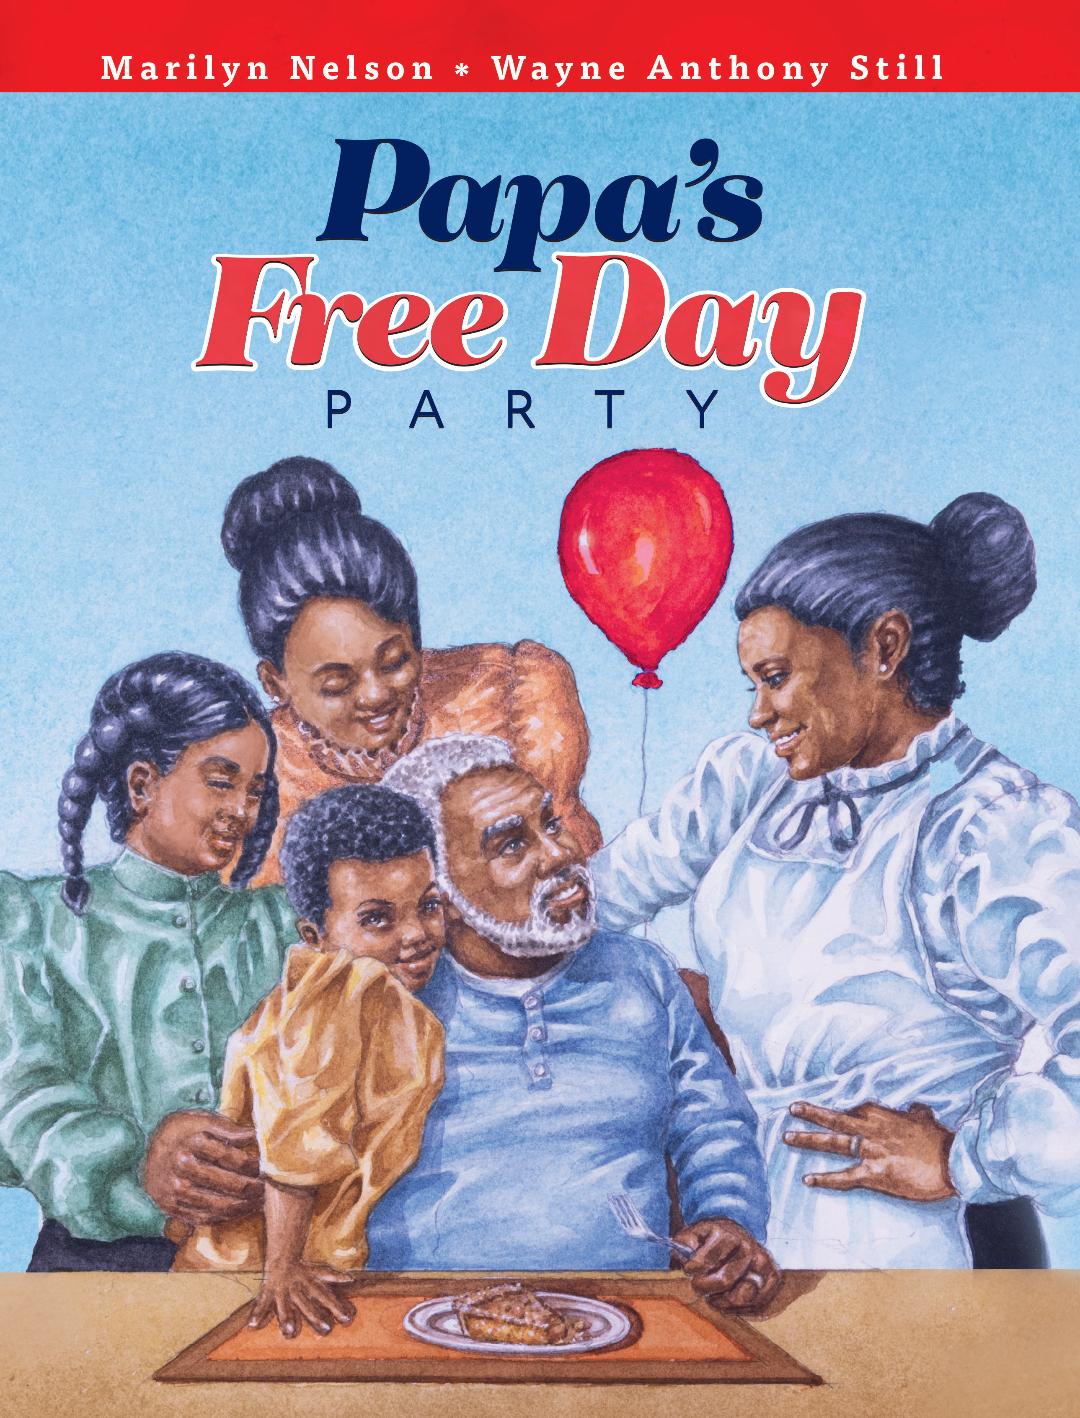 Cover Reveal: Papa’s Free Day Party